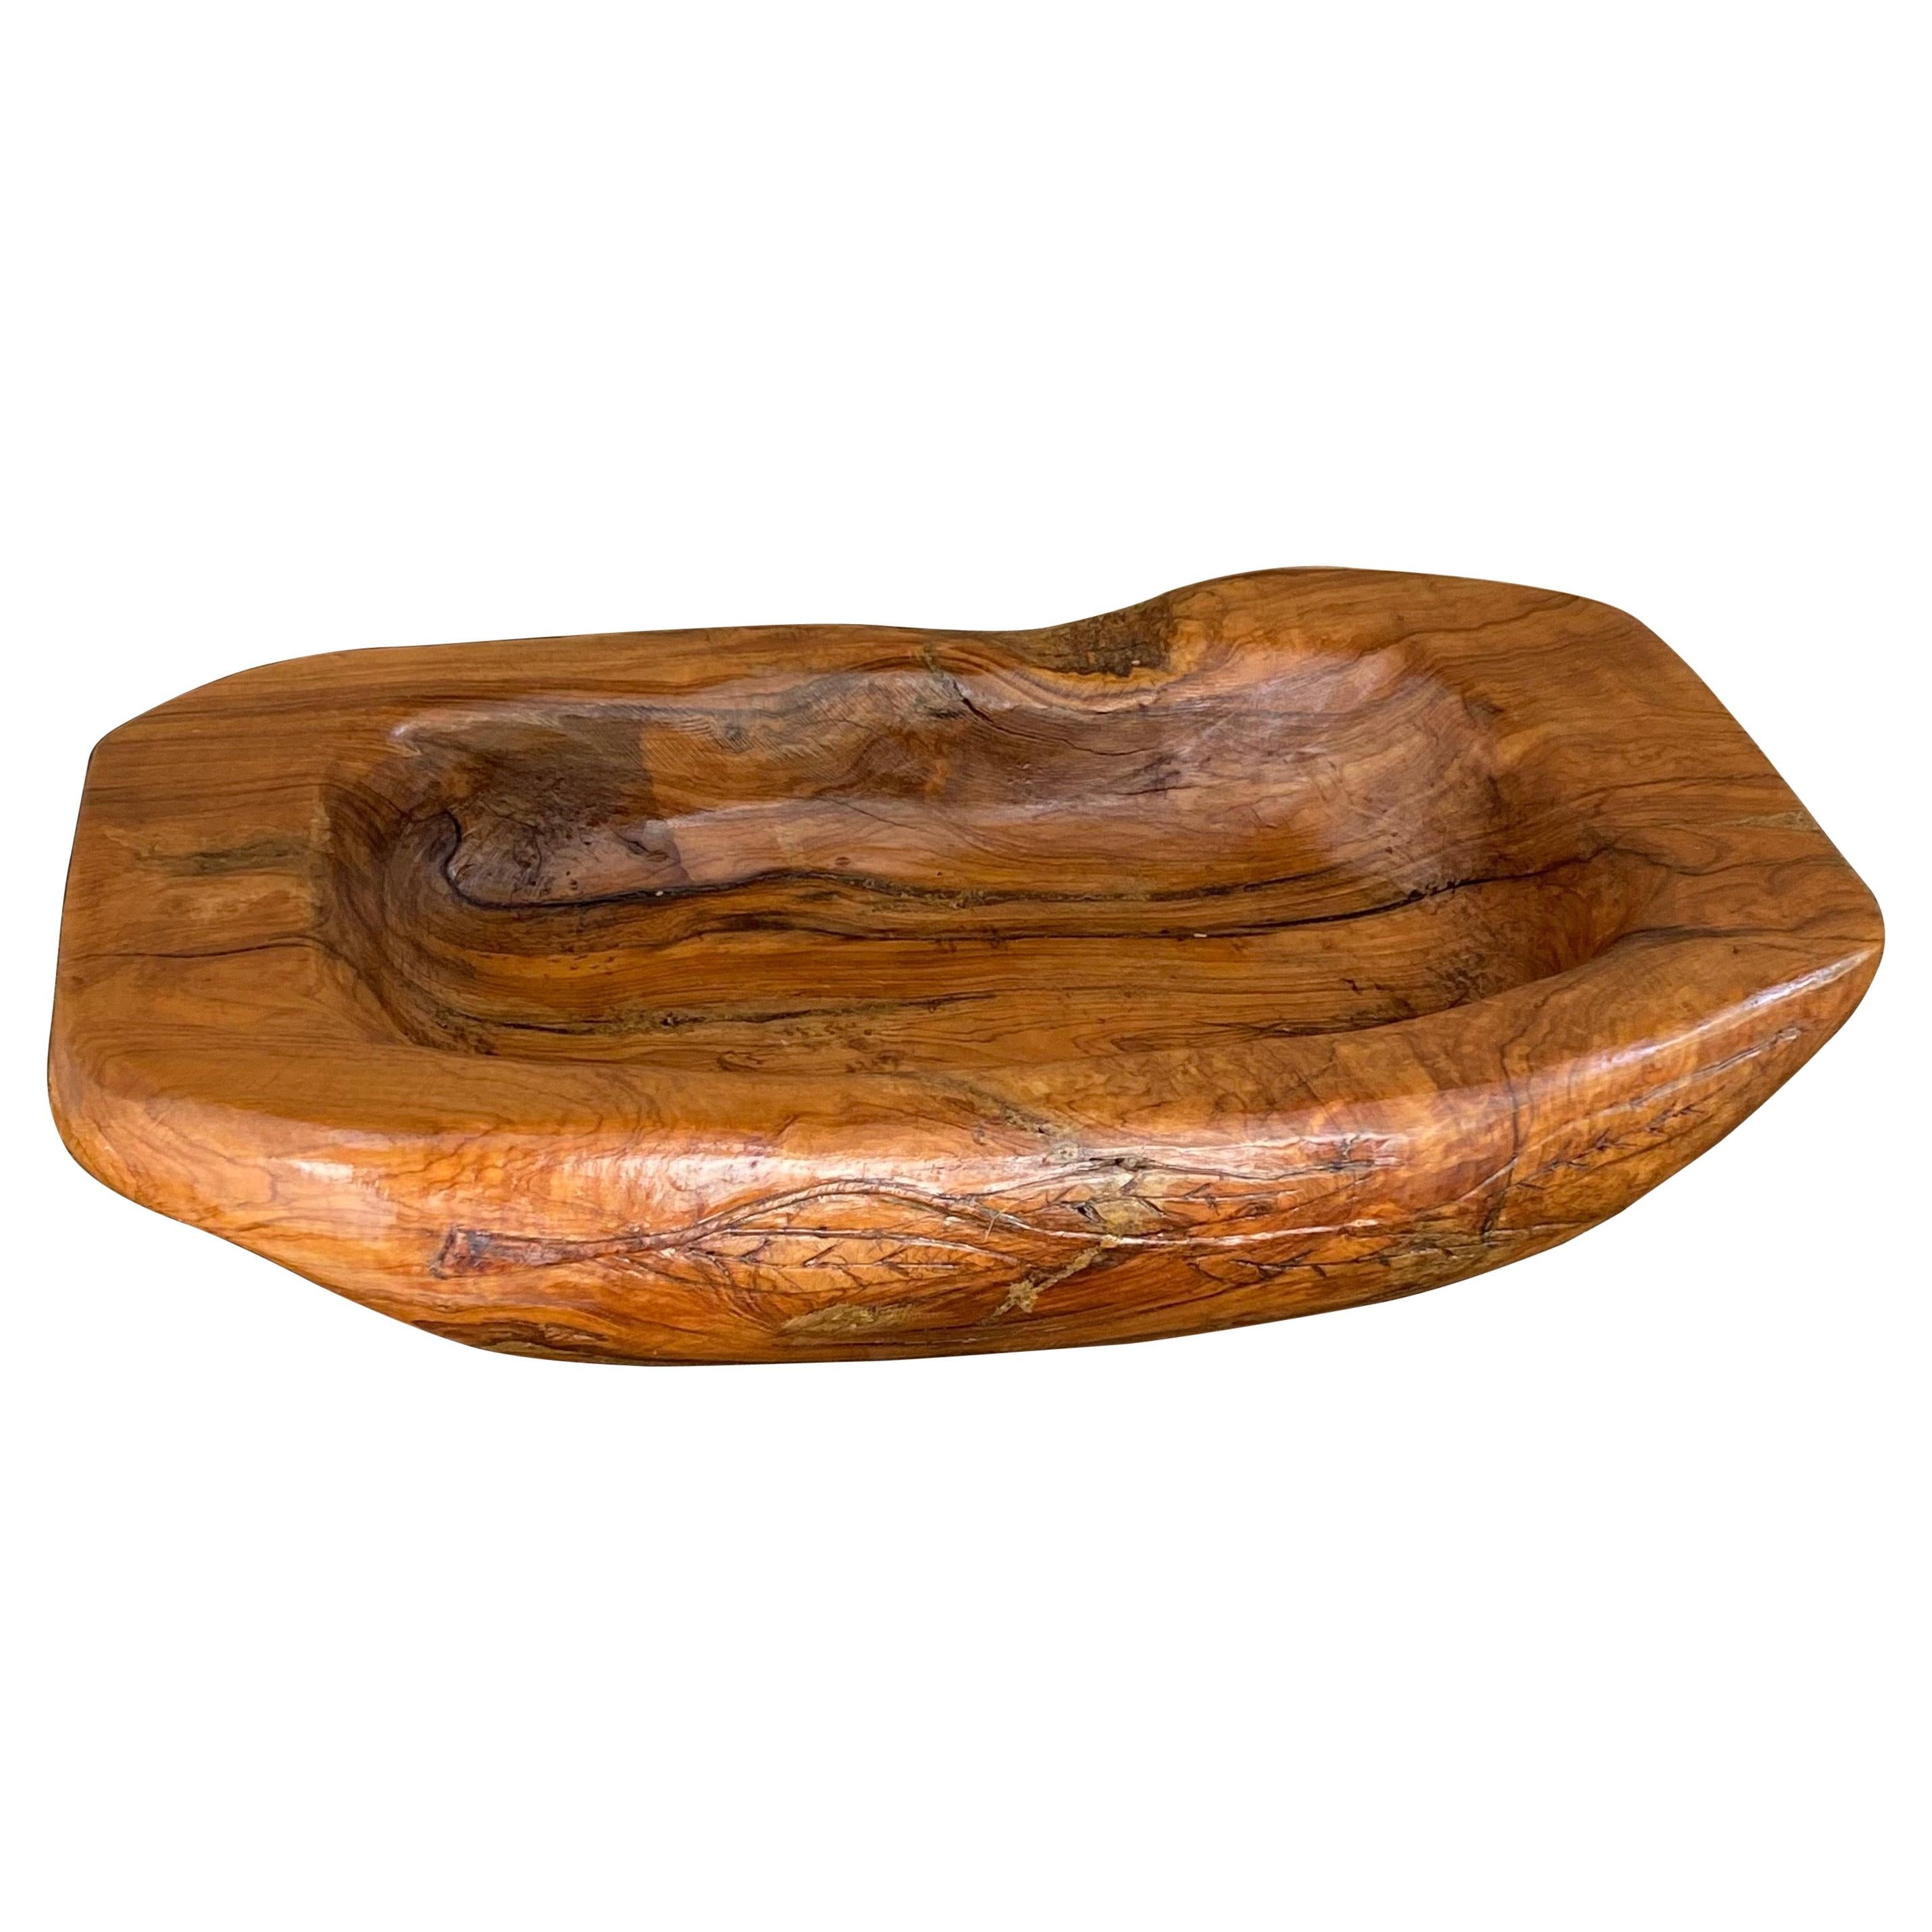 Vide Poche or Bowl in Wood, Old Patina, France 1950 For Sale